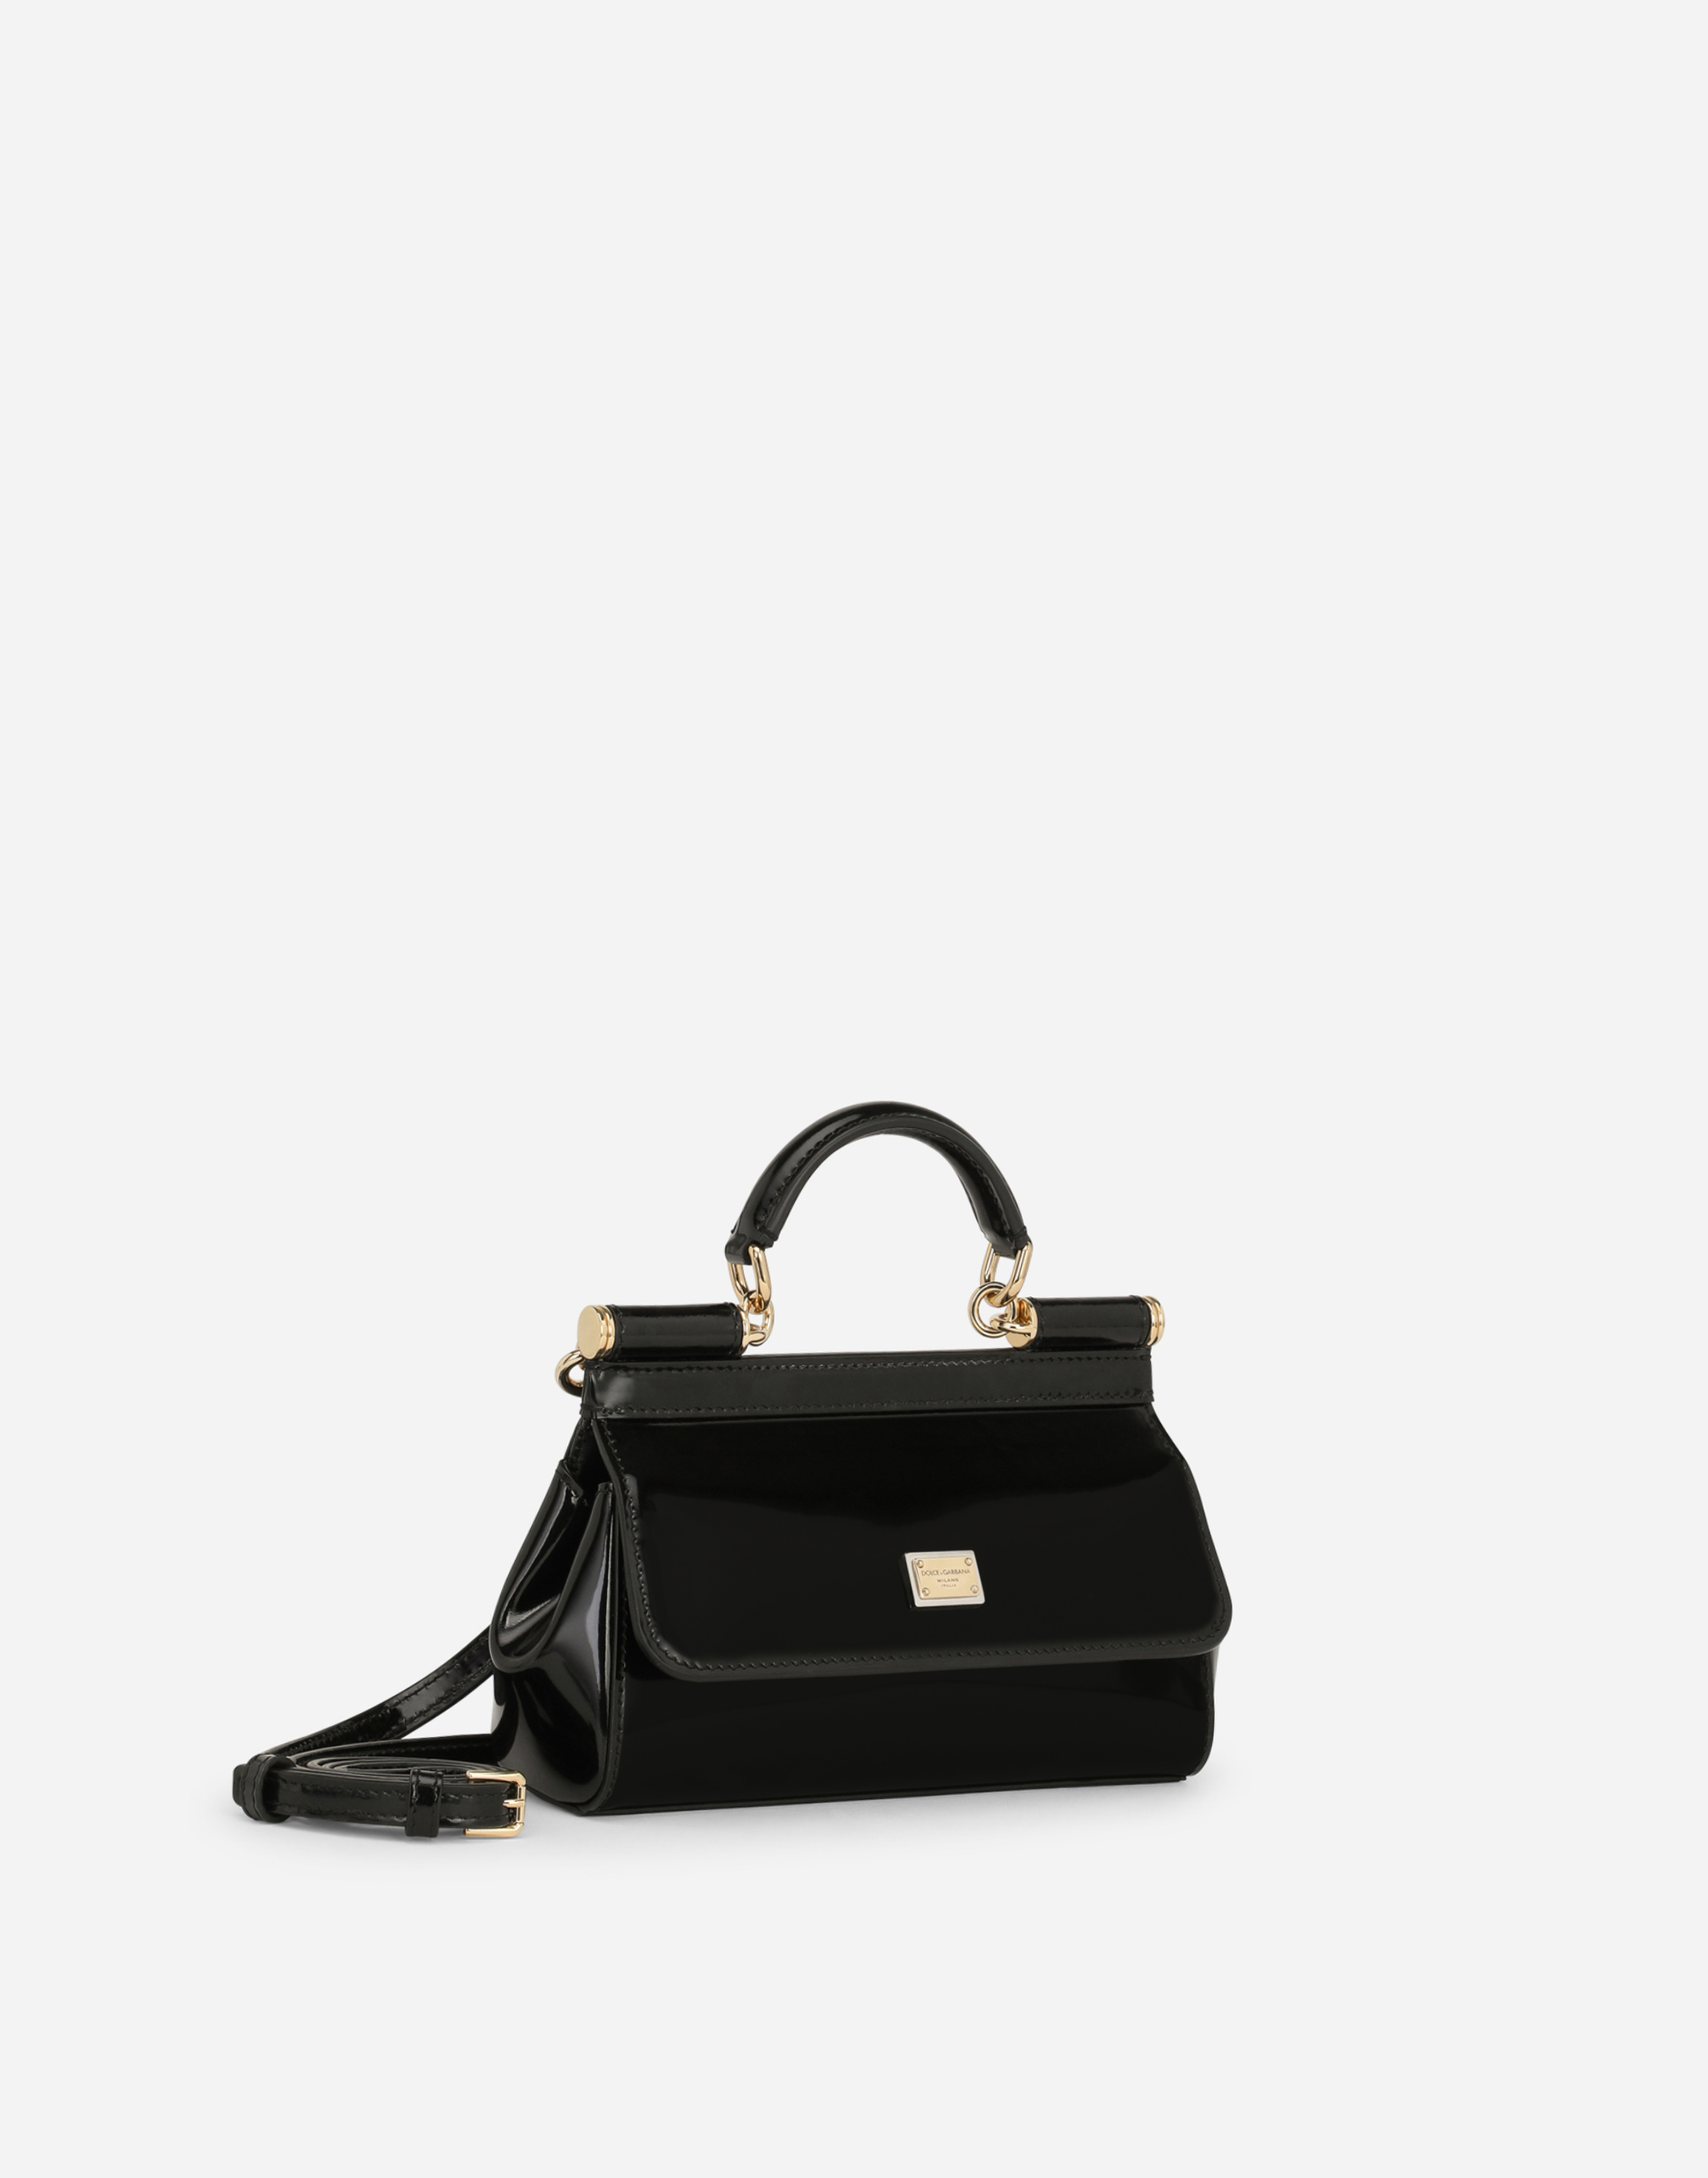 Dolce & Gabbana Black Sicily Small Leather Top Handle Bag